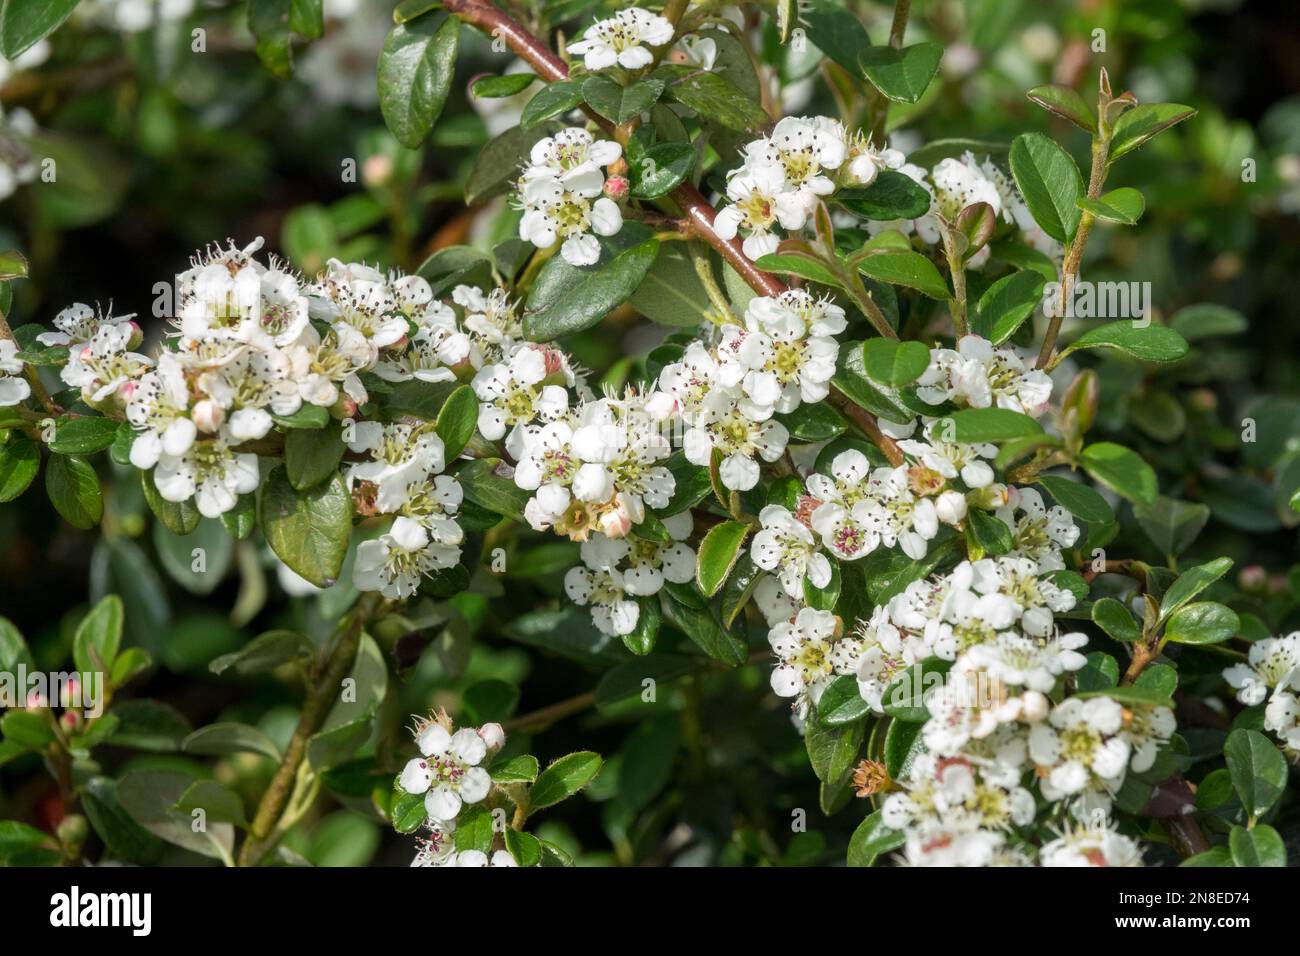 Cotoneaster x suecicus 'Coral Beauty', Swedish Cotoneaster, Flowers, Blooming, White, Blooms Stock Photo